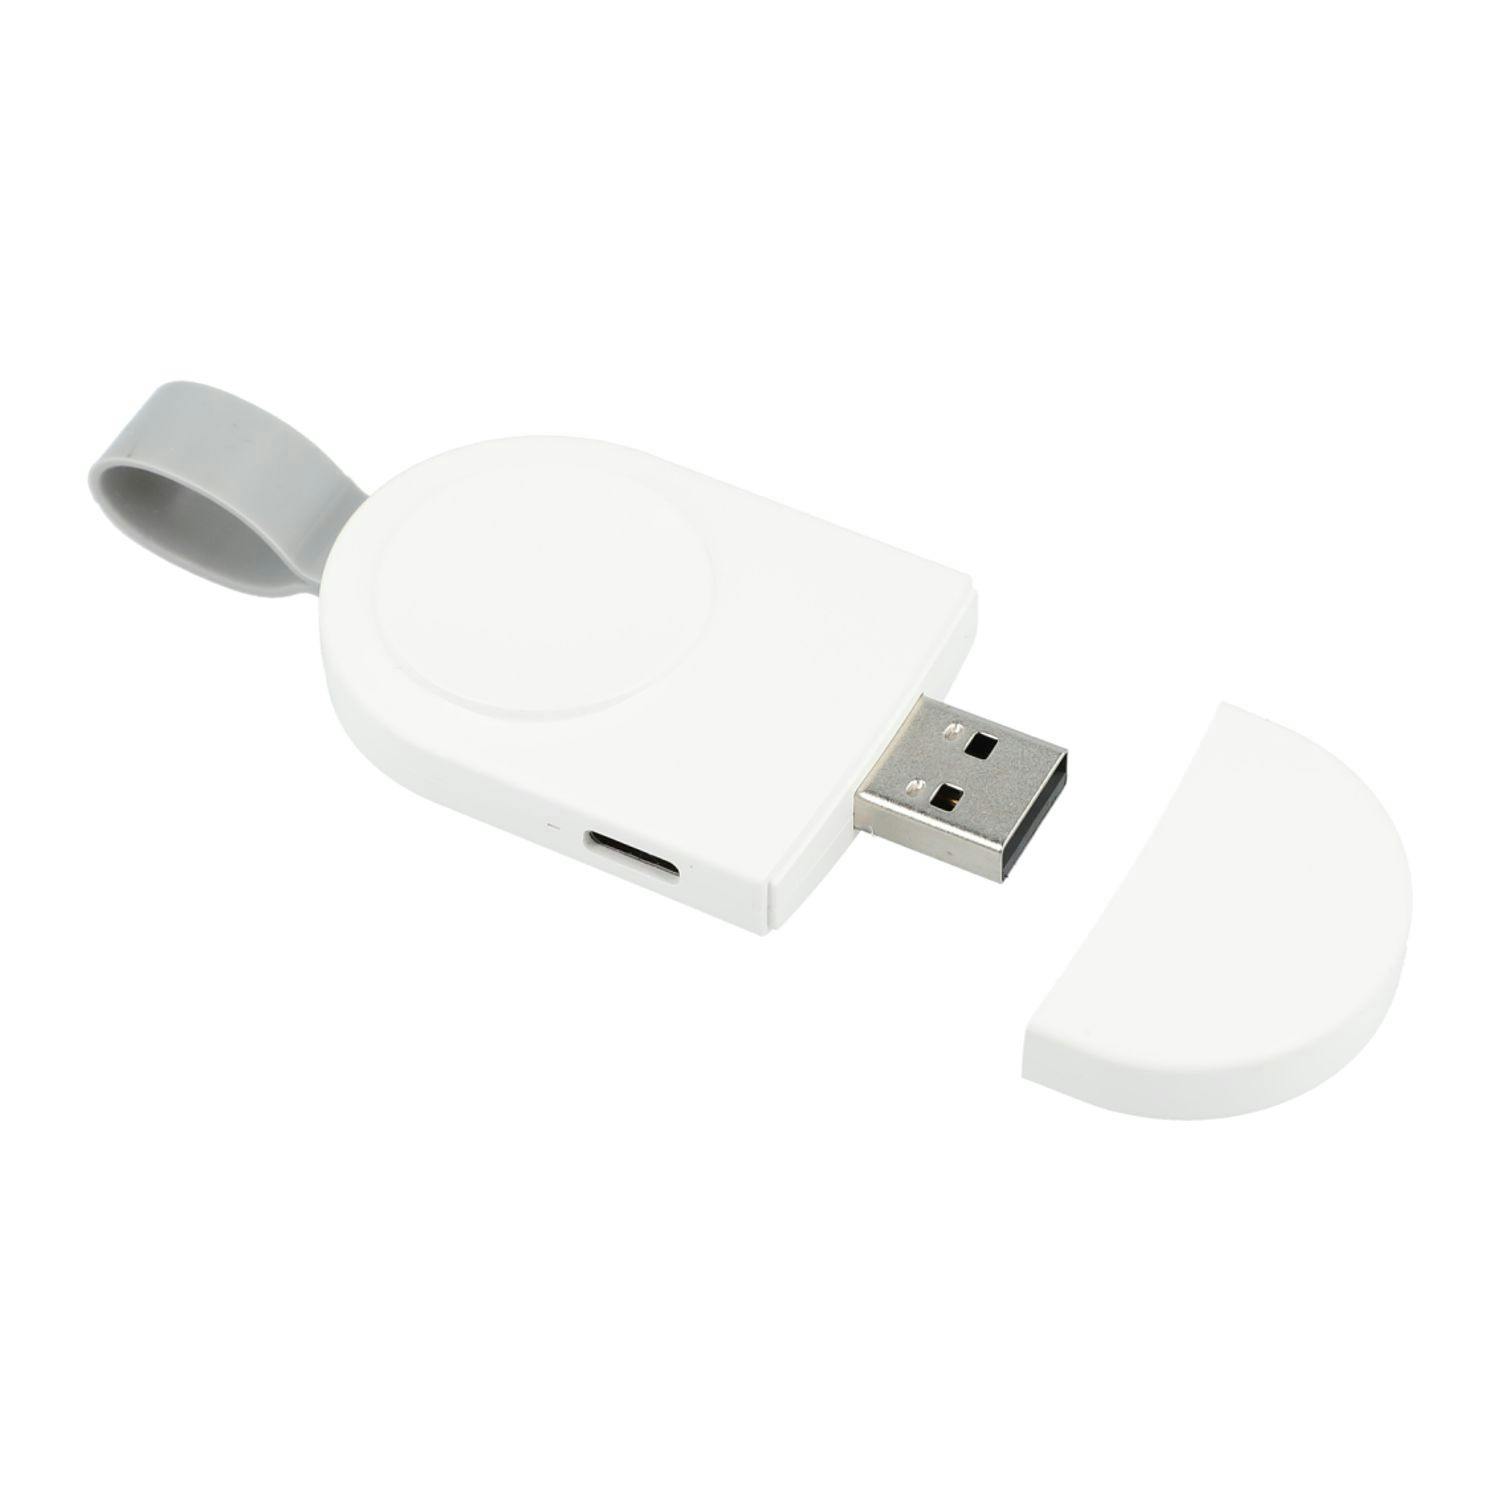 Redi iWatch USB Charger - additional Image 1